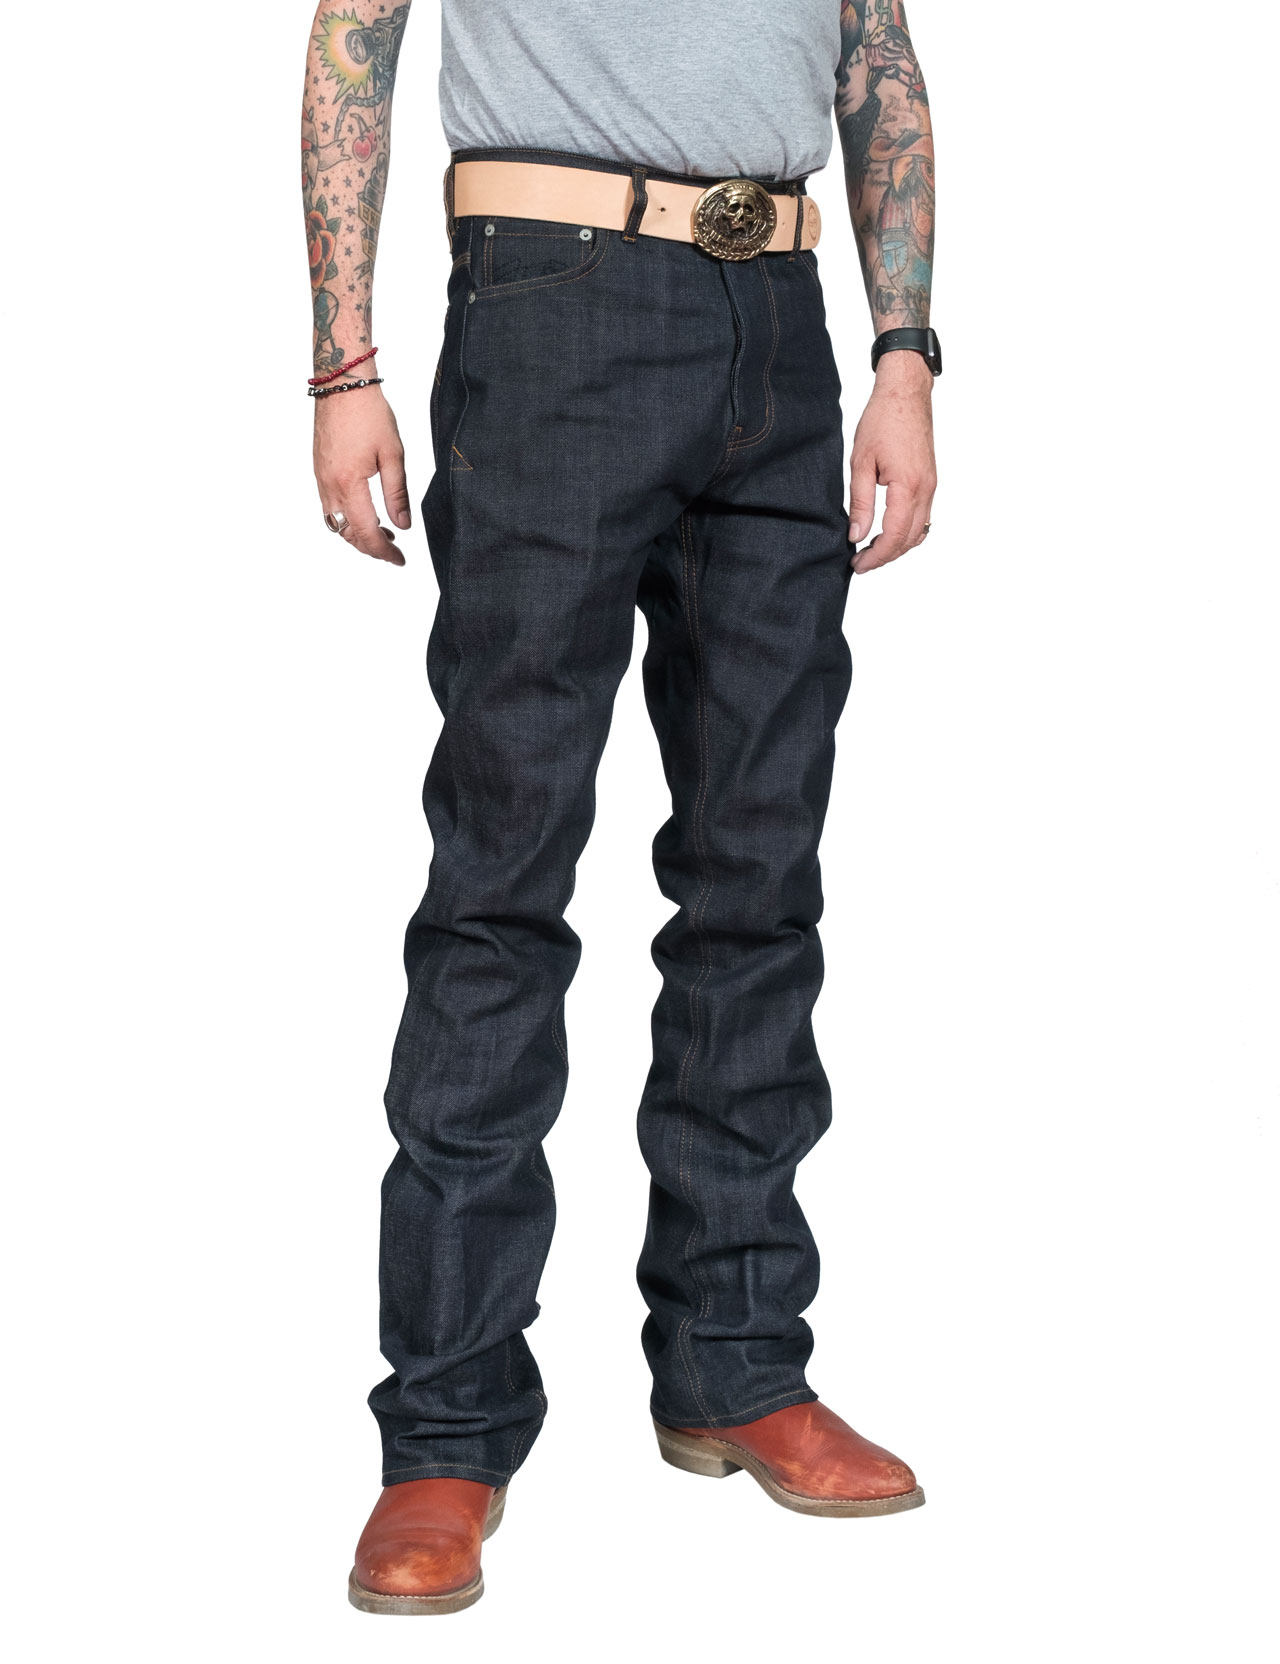 Eat-Dust---Fit-63-Bootcut-Raw-Selvage-Jeans-31245